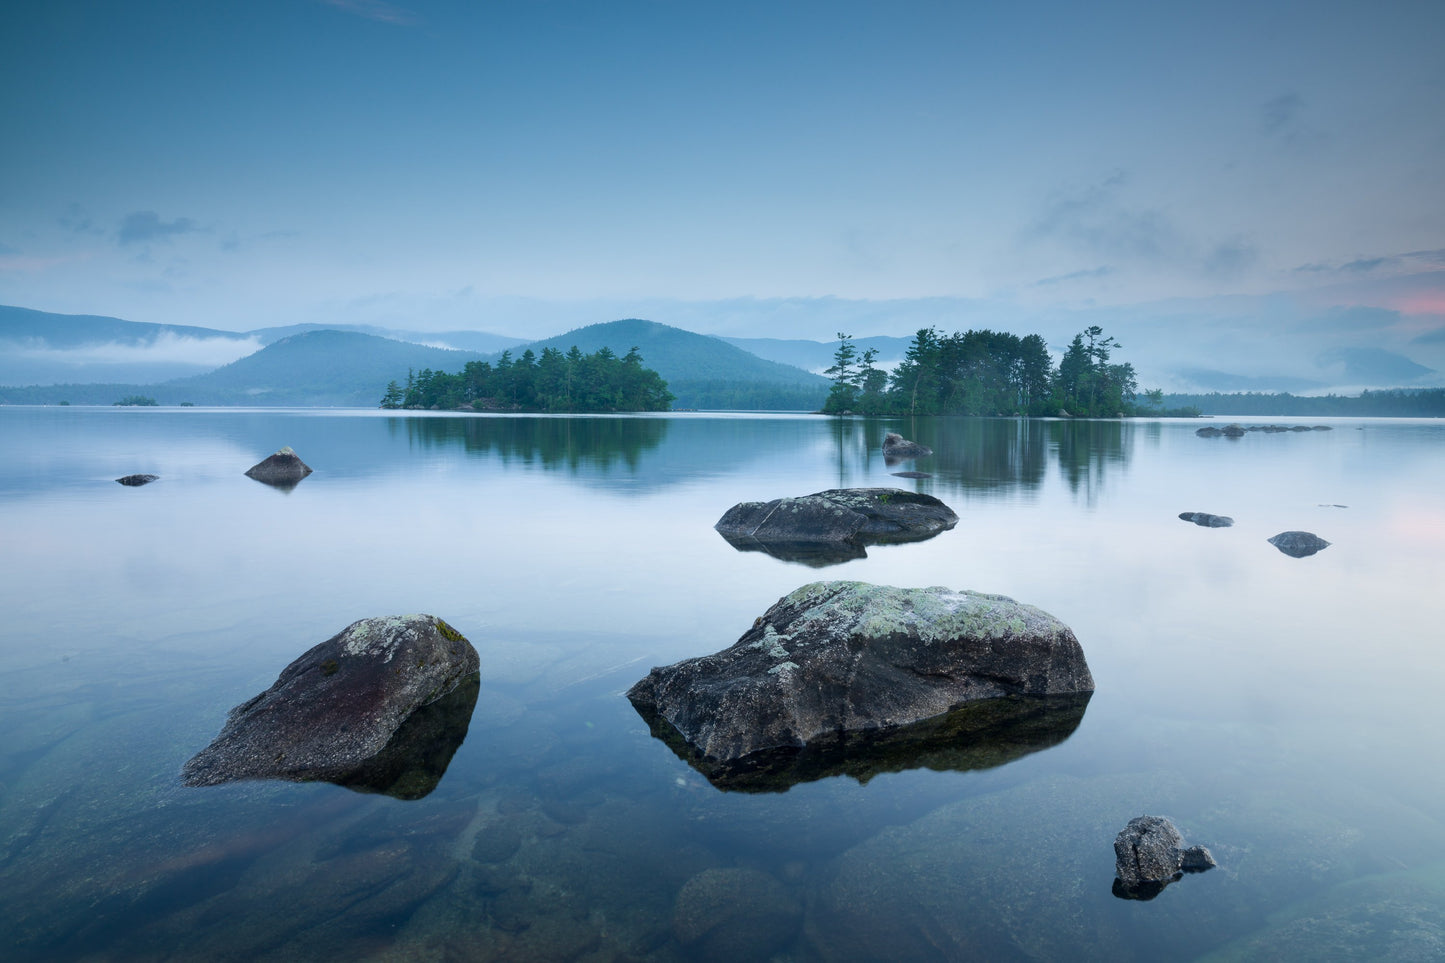 early morning on Loon Island in New Hampshire